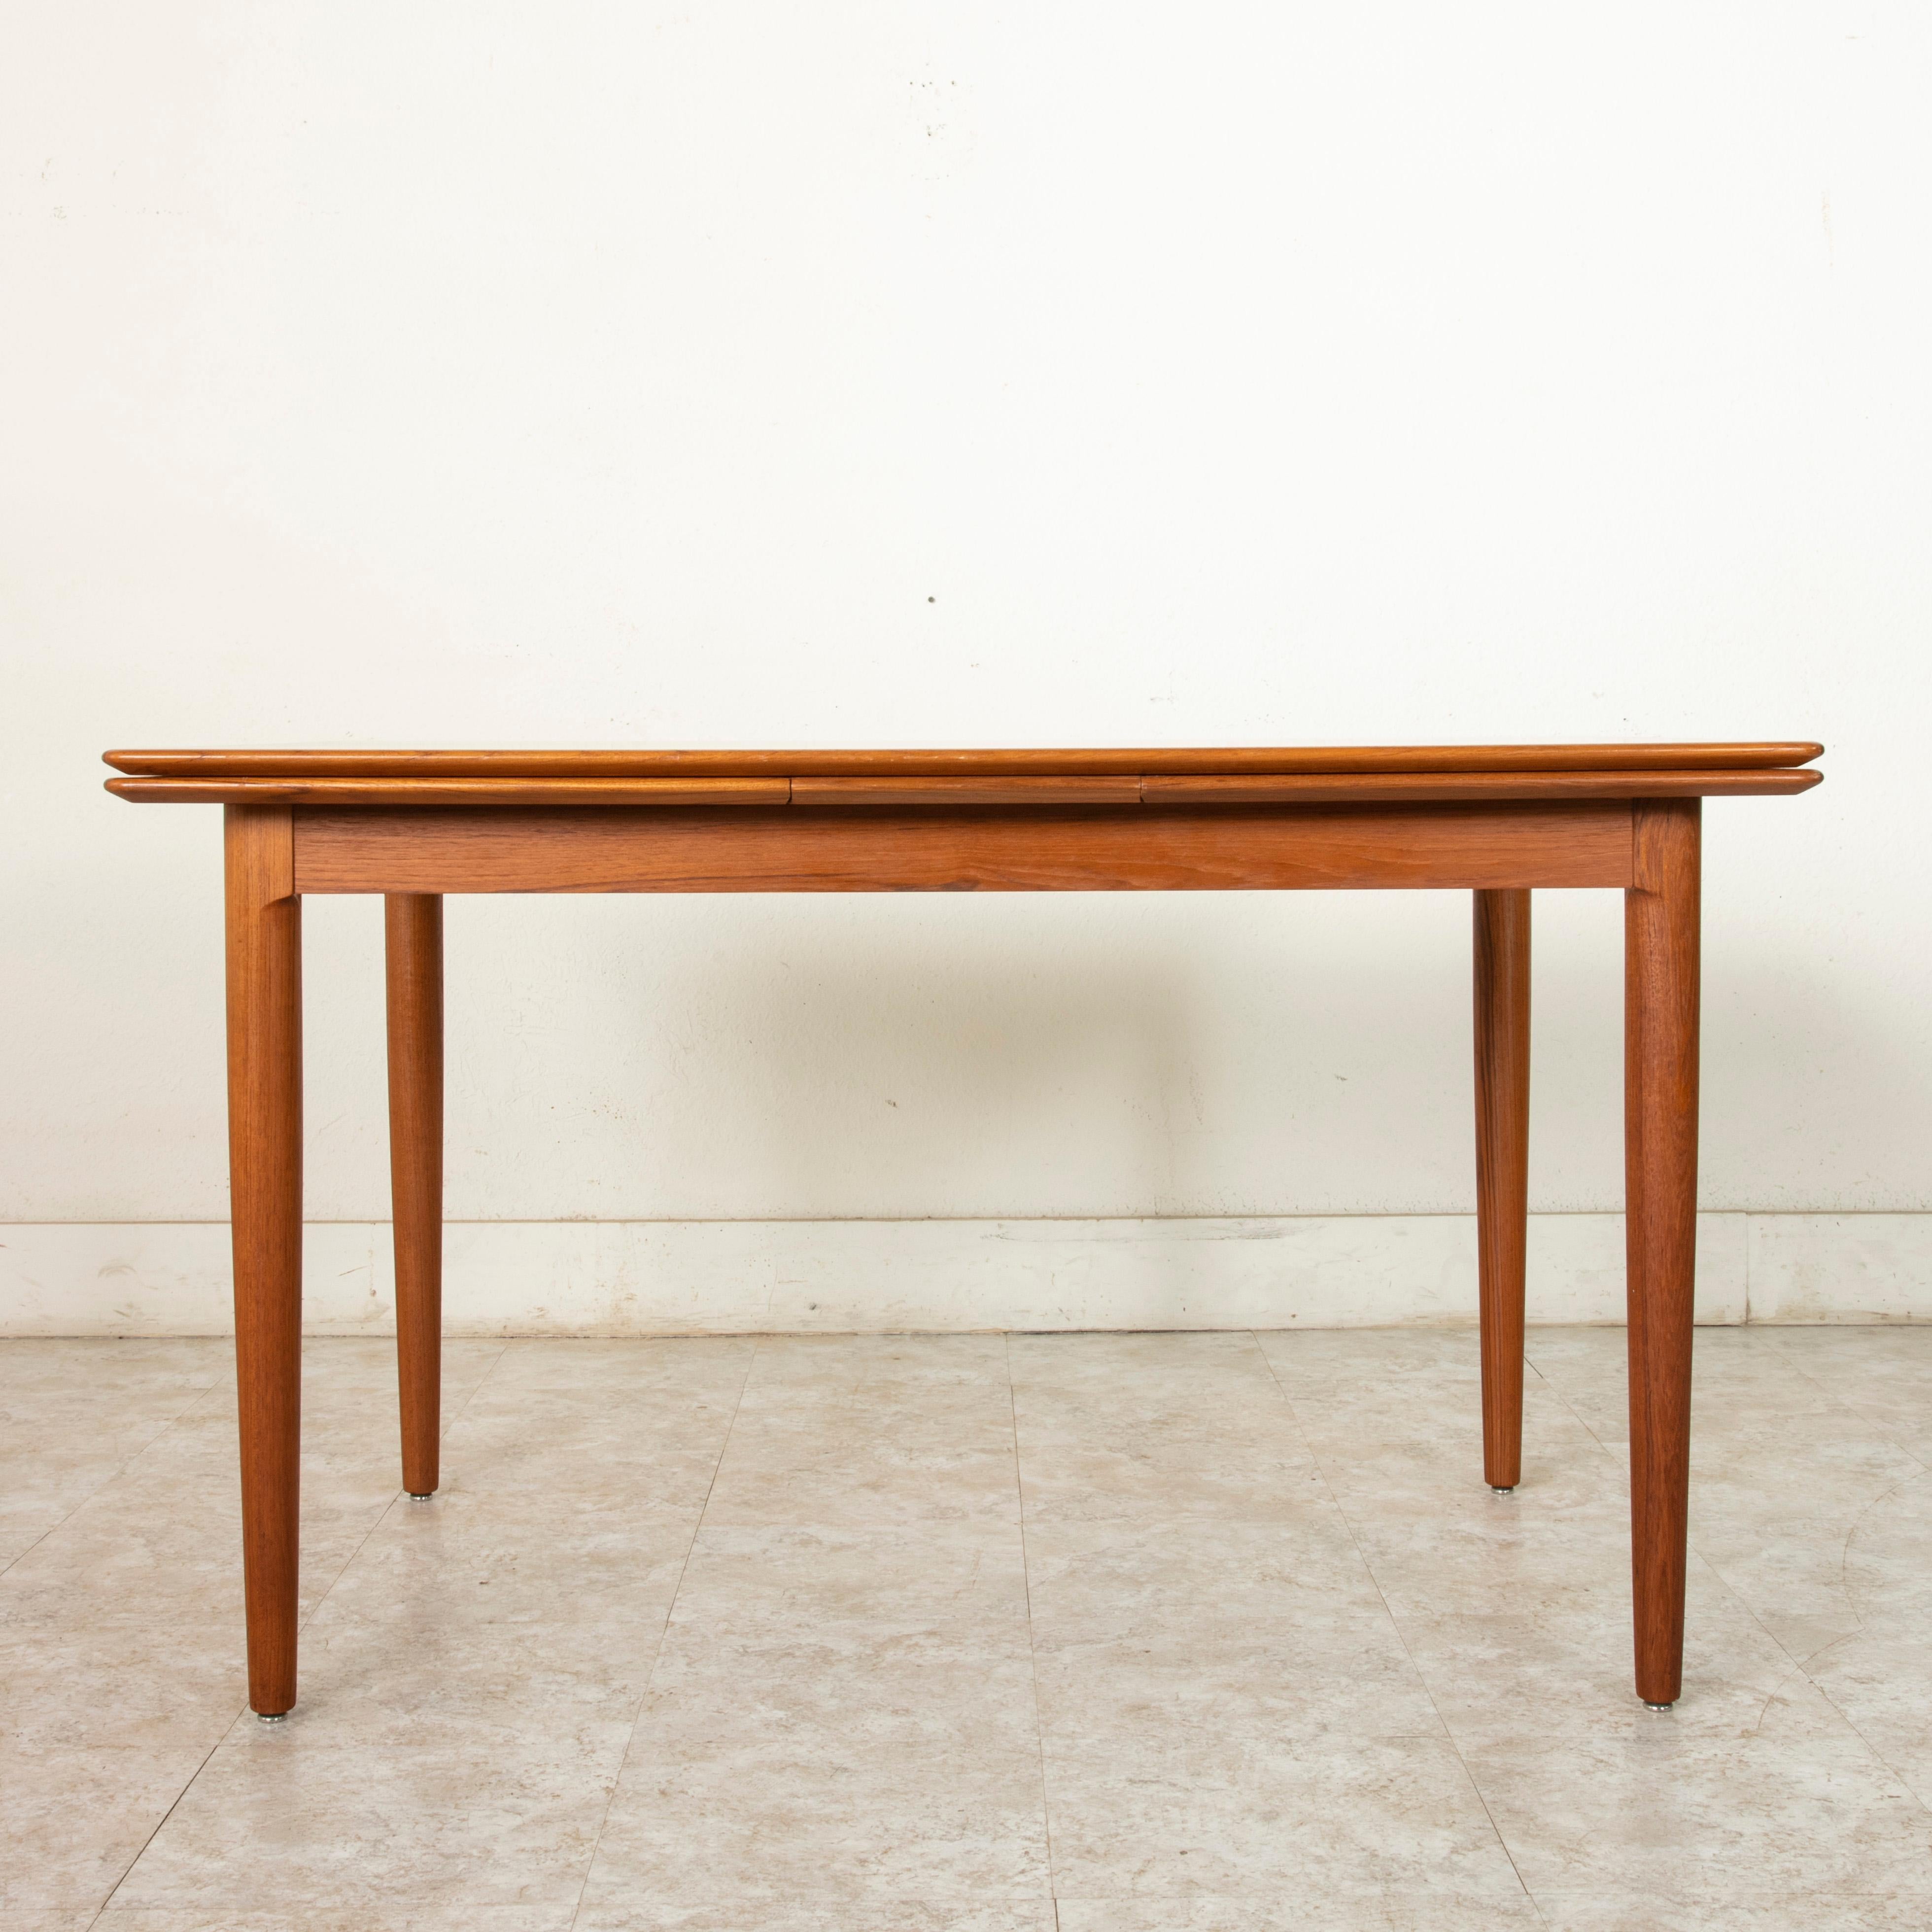 This Mid-Century Modern Danish dining table constructed of teak wood features a nearly 50 inch long by 34 inch wide top that rests on sleek tapered legs. Draw leaves add an additional 19.5 inches to each end allowing for a total length of 88.5